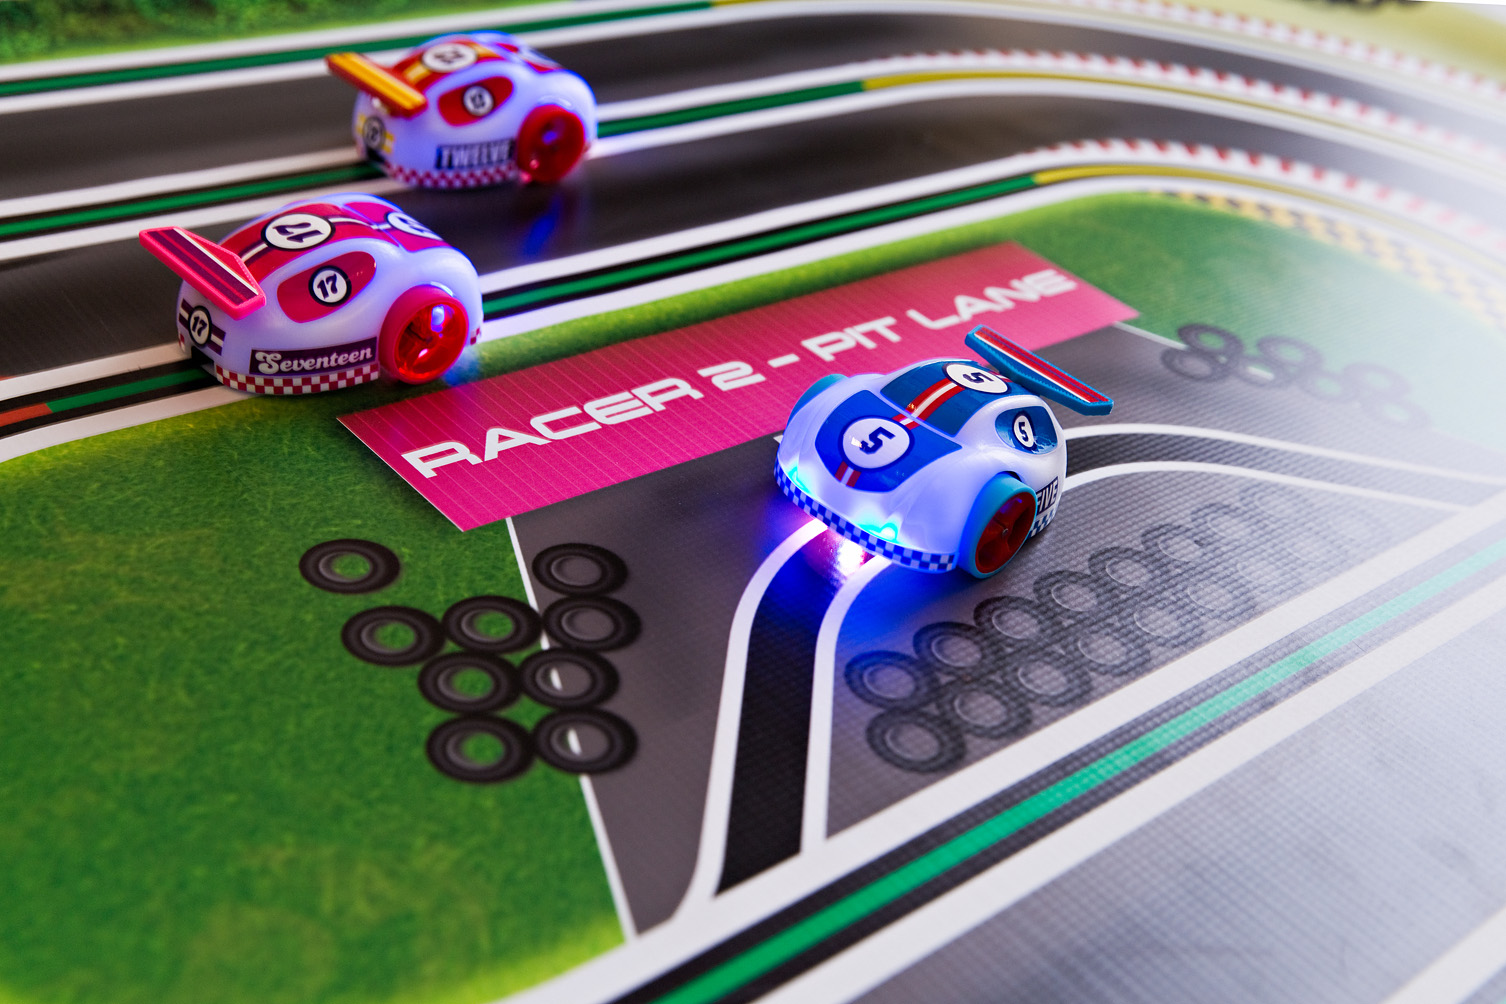 Cannybots using their Brains on the race track